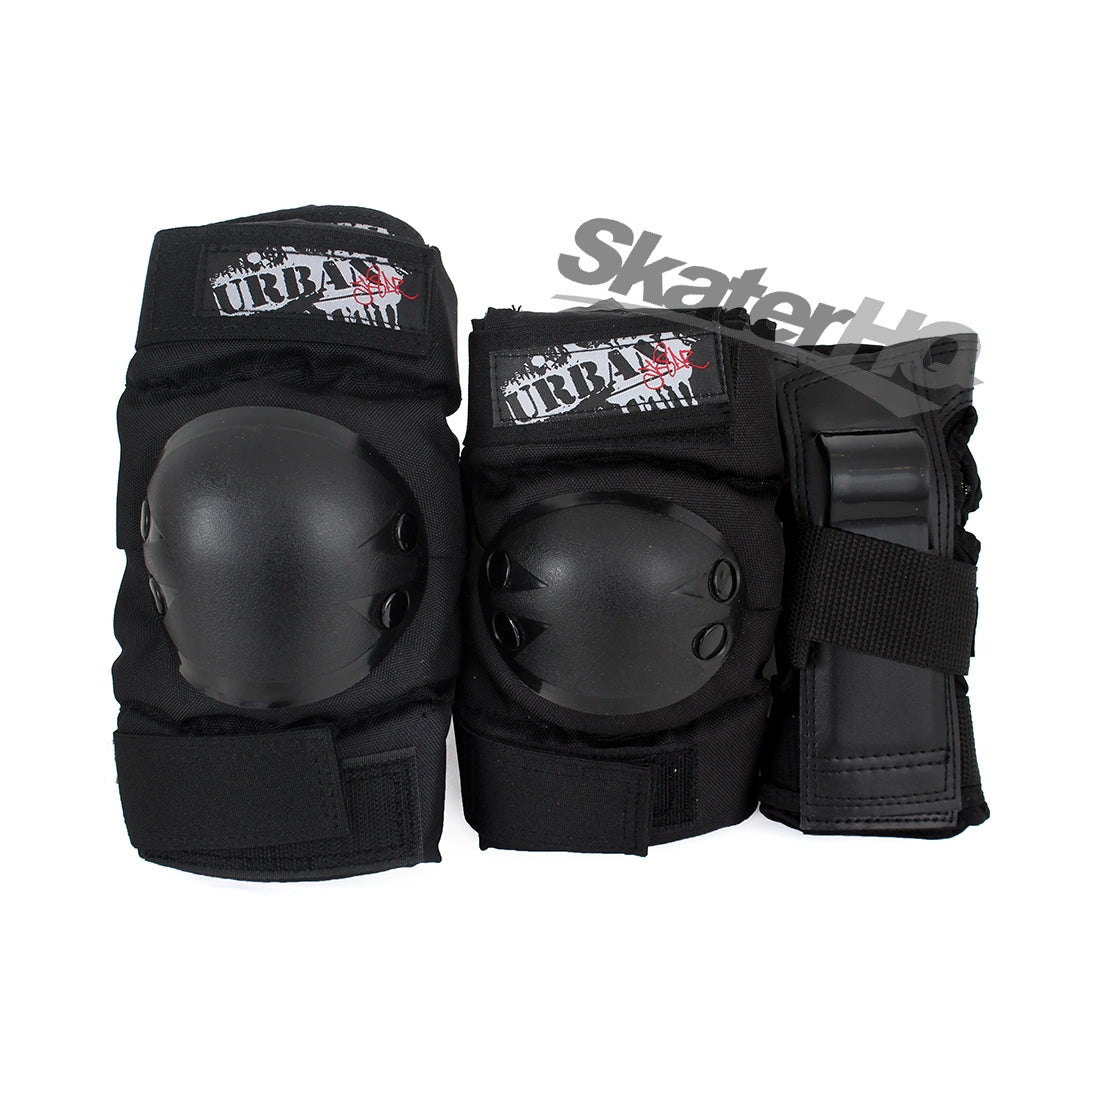 Urban Skater Tri Pack Black - Small Protective Gear